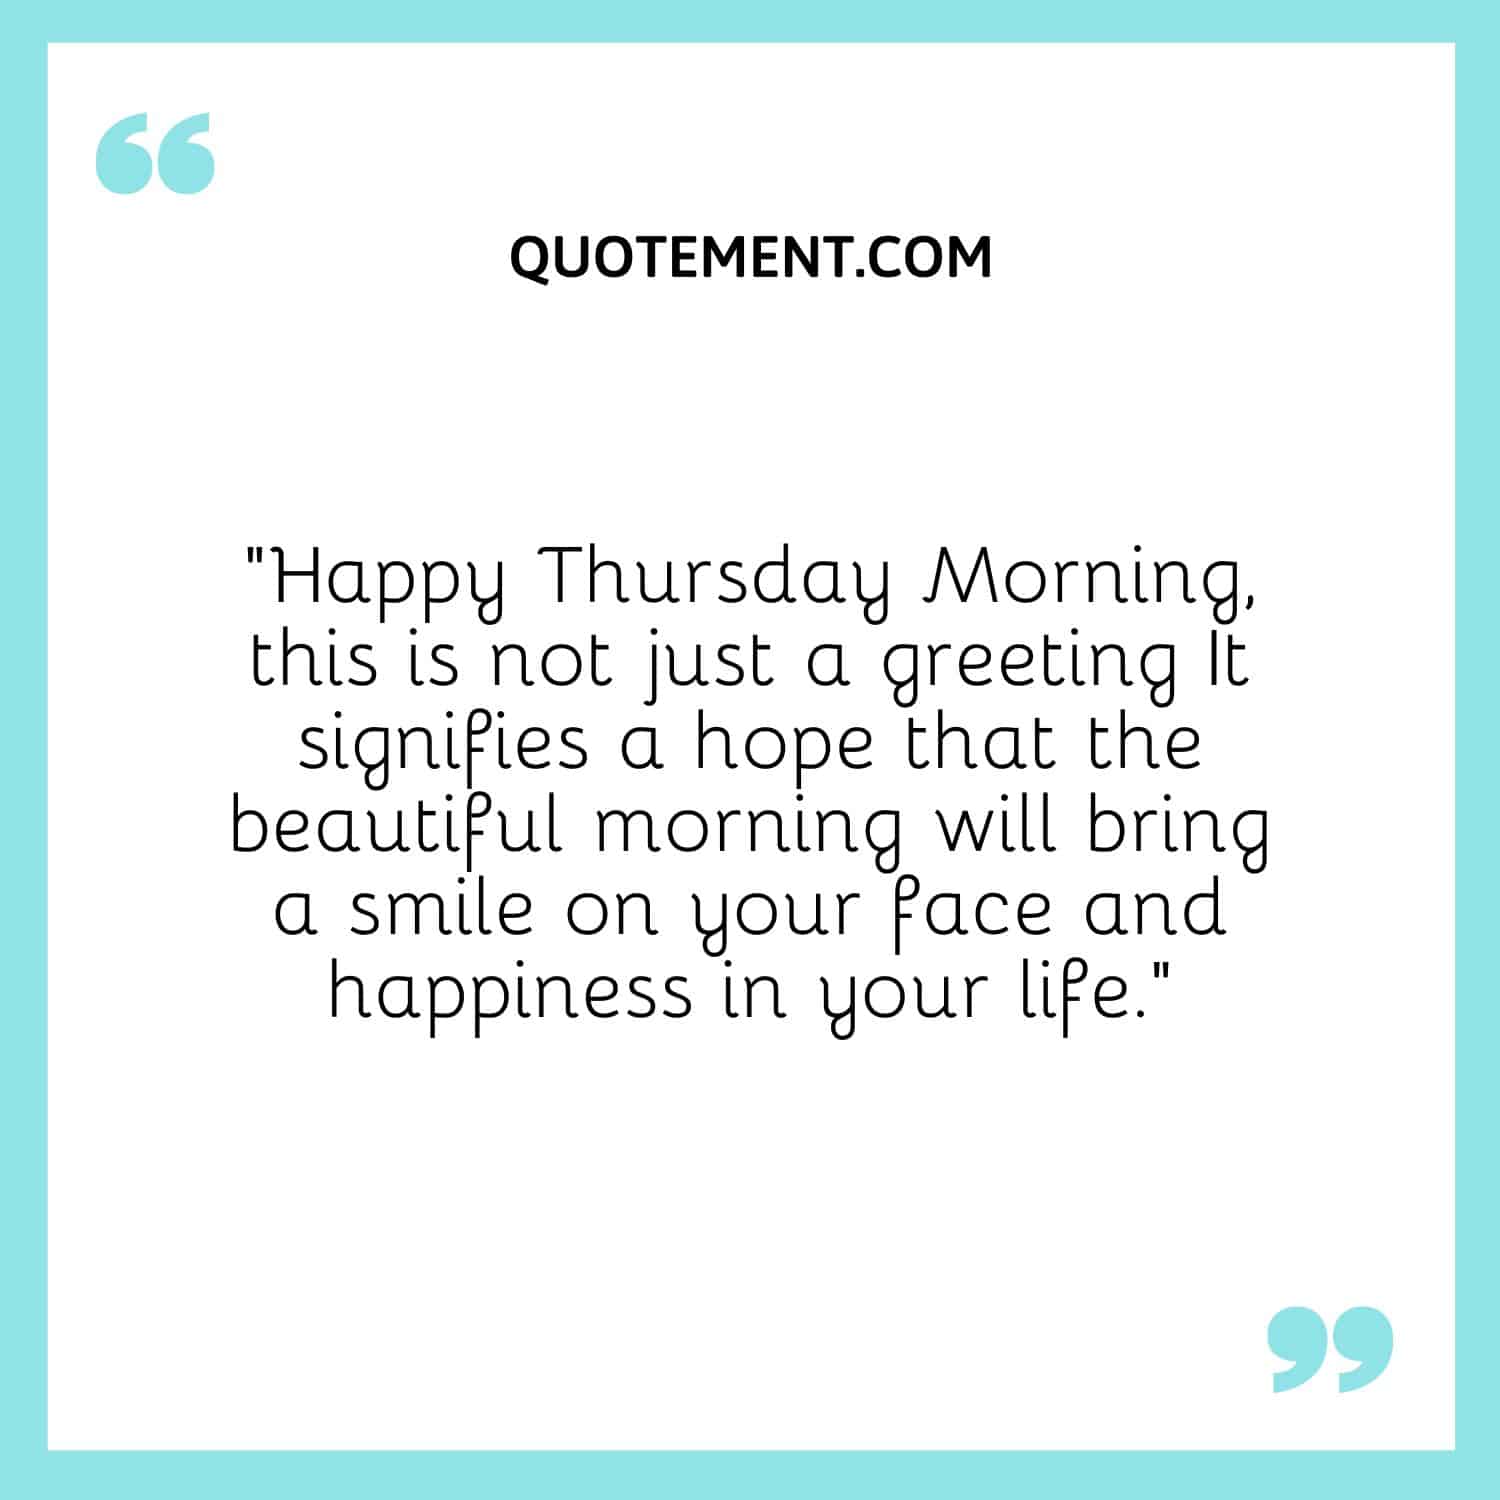 “Happy Thursday Morning, this is not just a greeting It signifies a hope that the beautiful morning will bring a smile on your face and happiness in your life.”